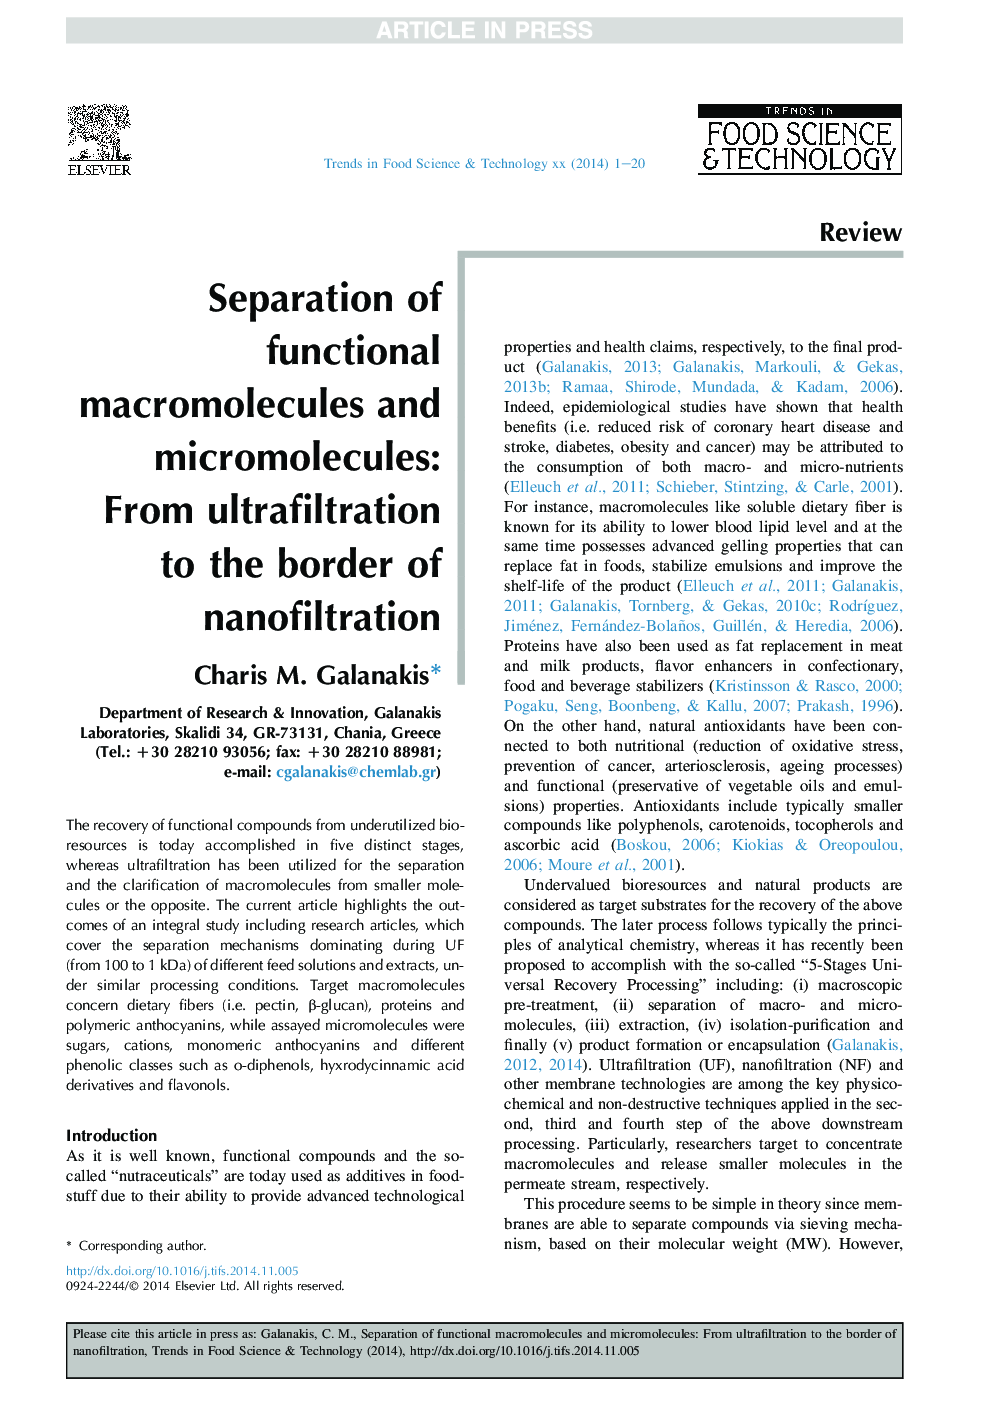 Separation of functional macromolecules and micromolecules: From ultrafiltration to the border of nanofiltration